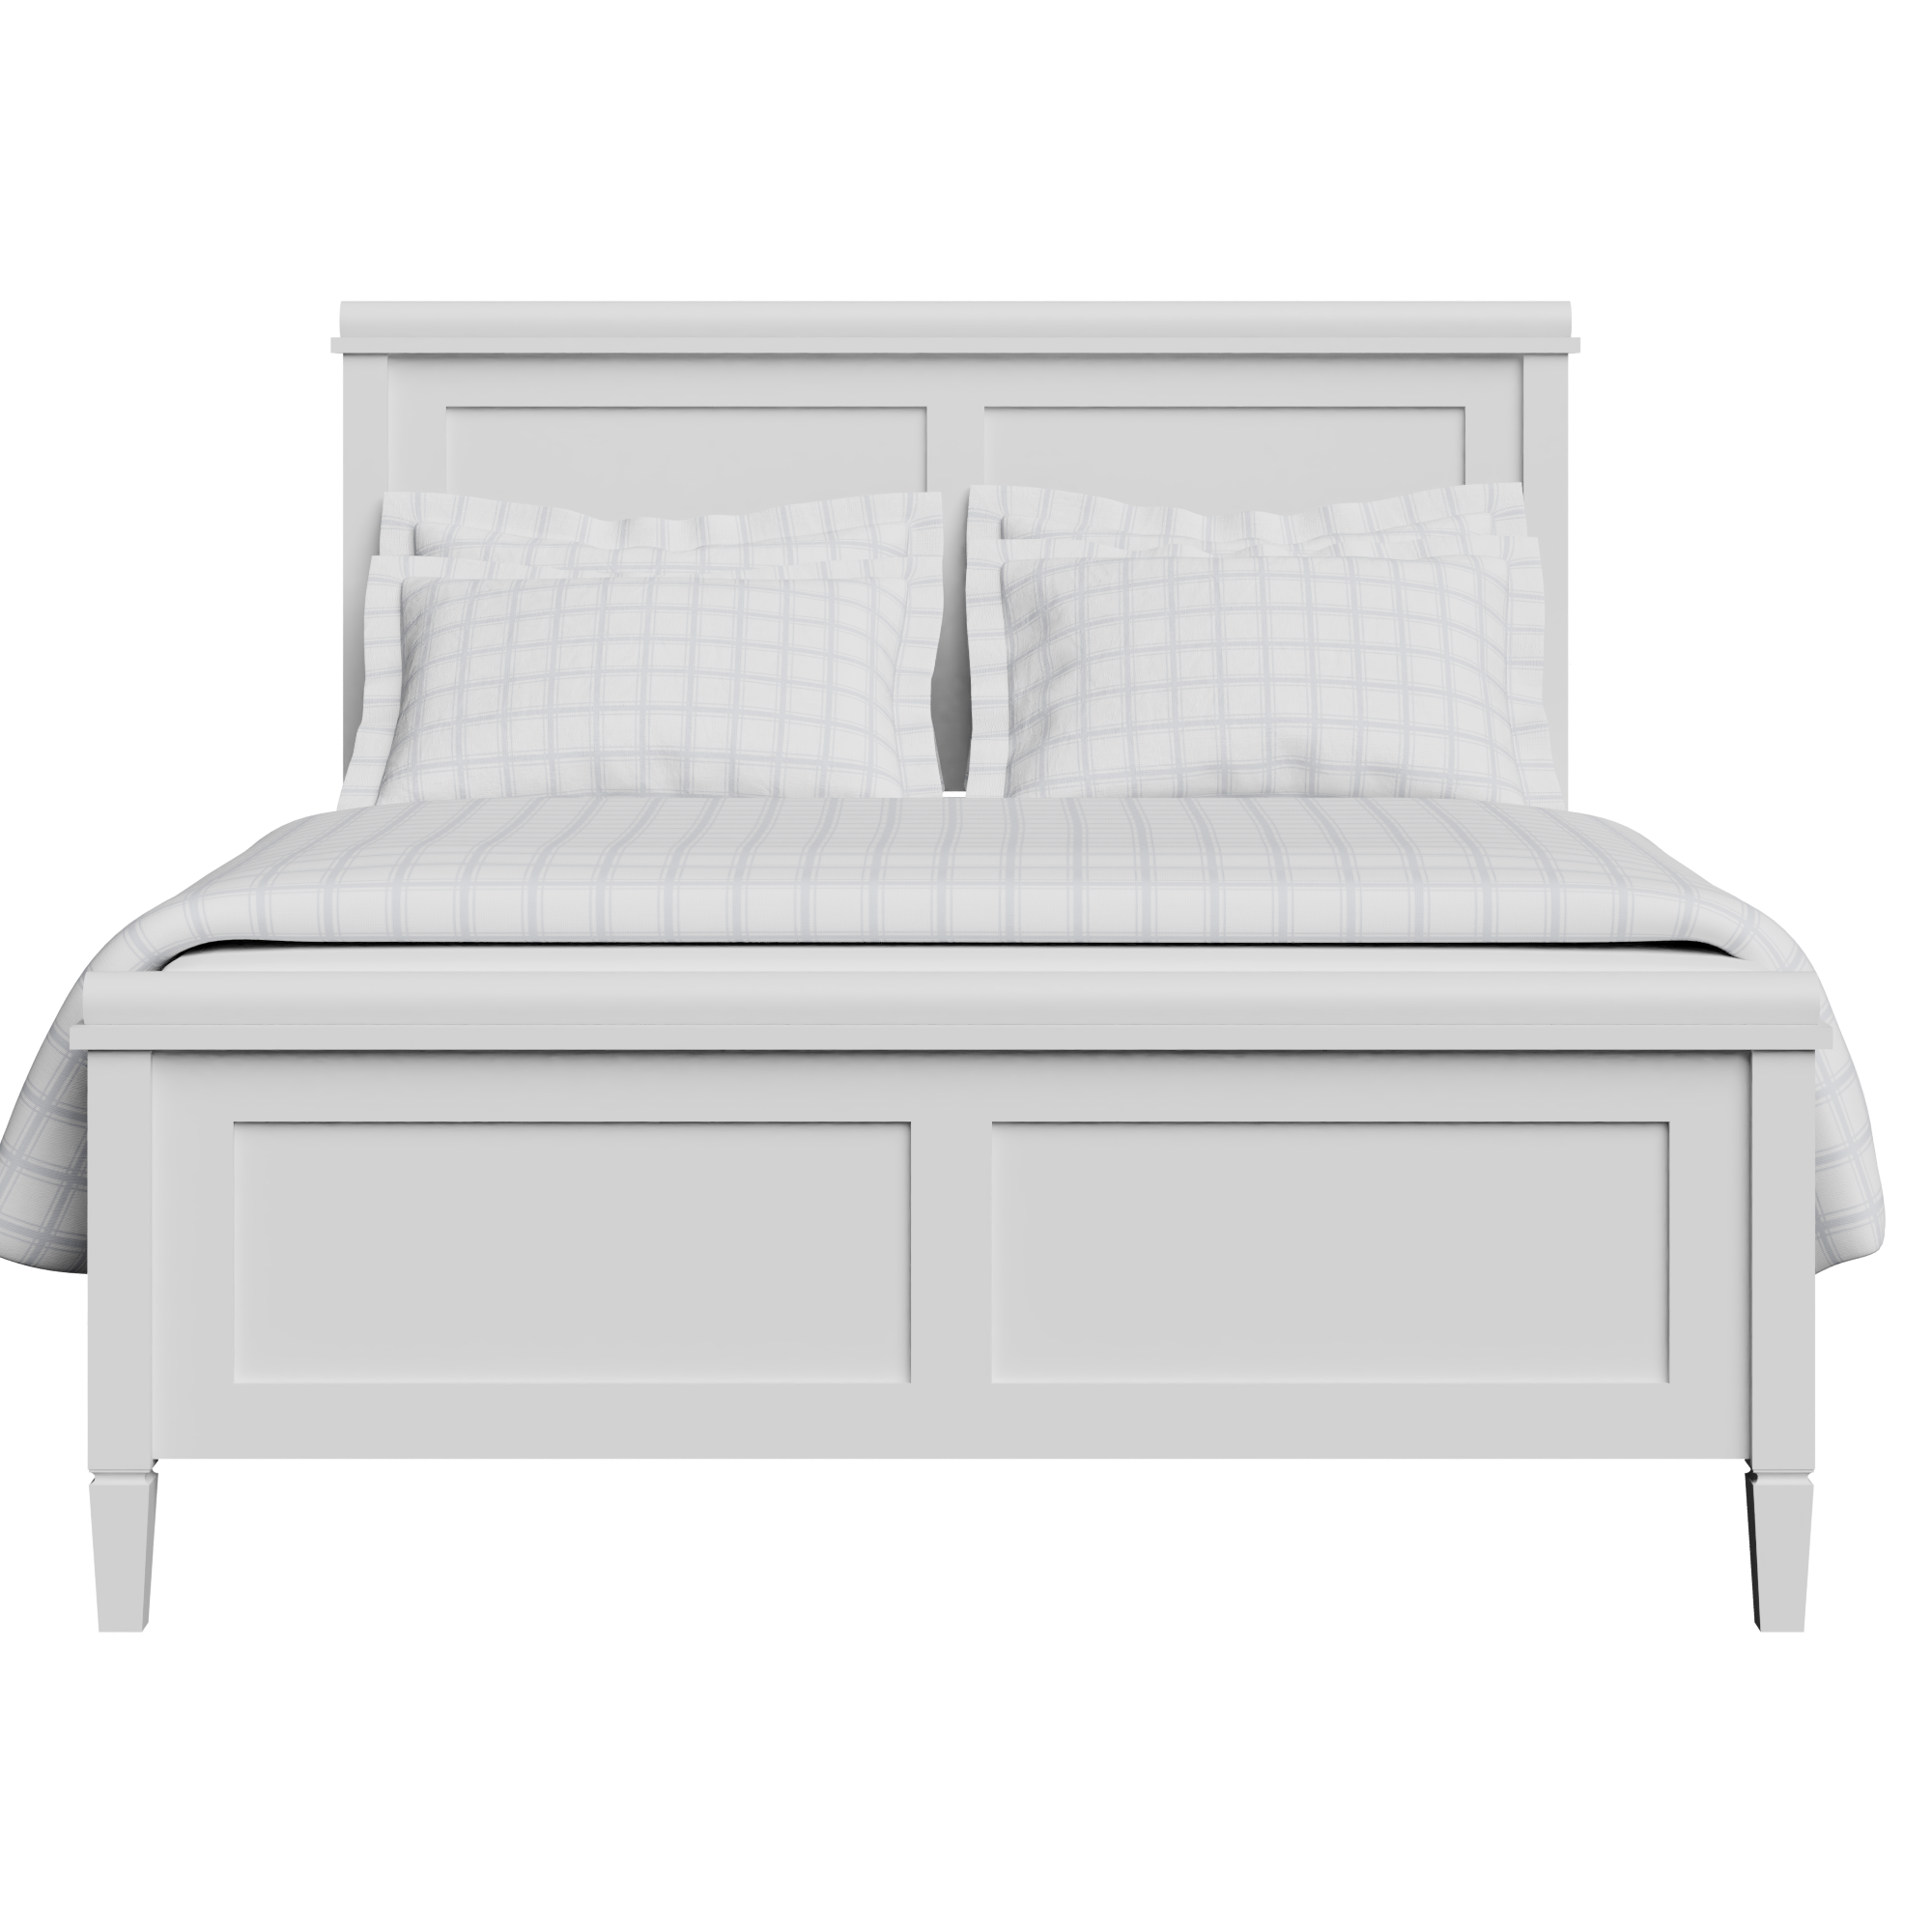 Nocturne Painted houten bed in wit